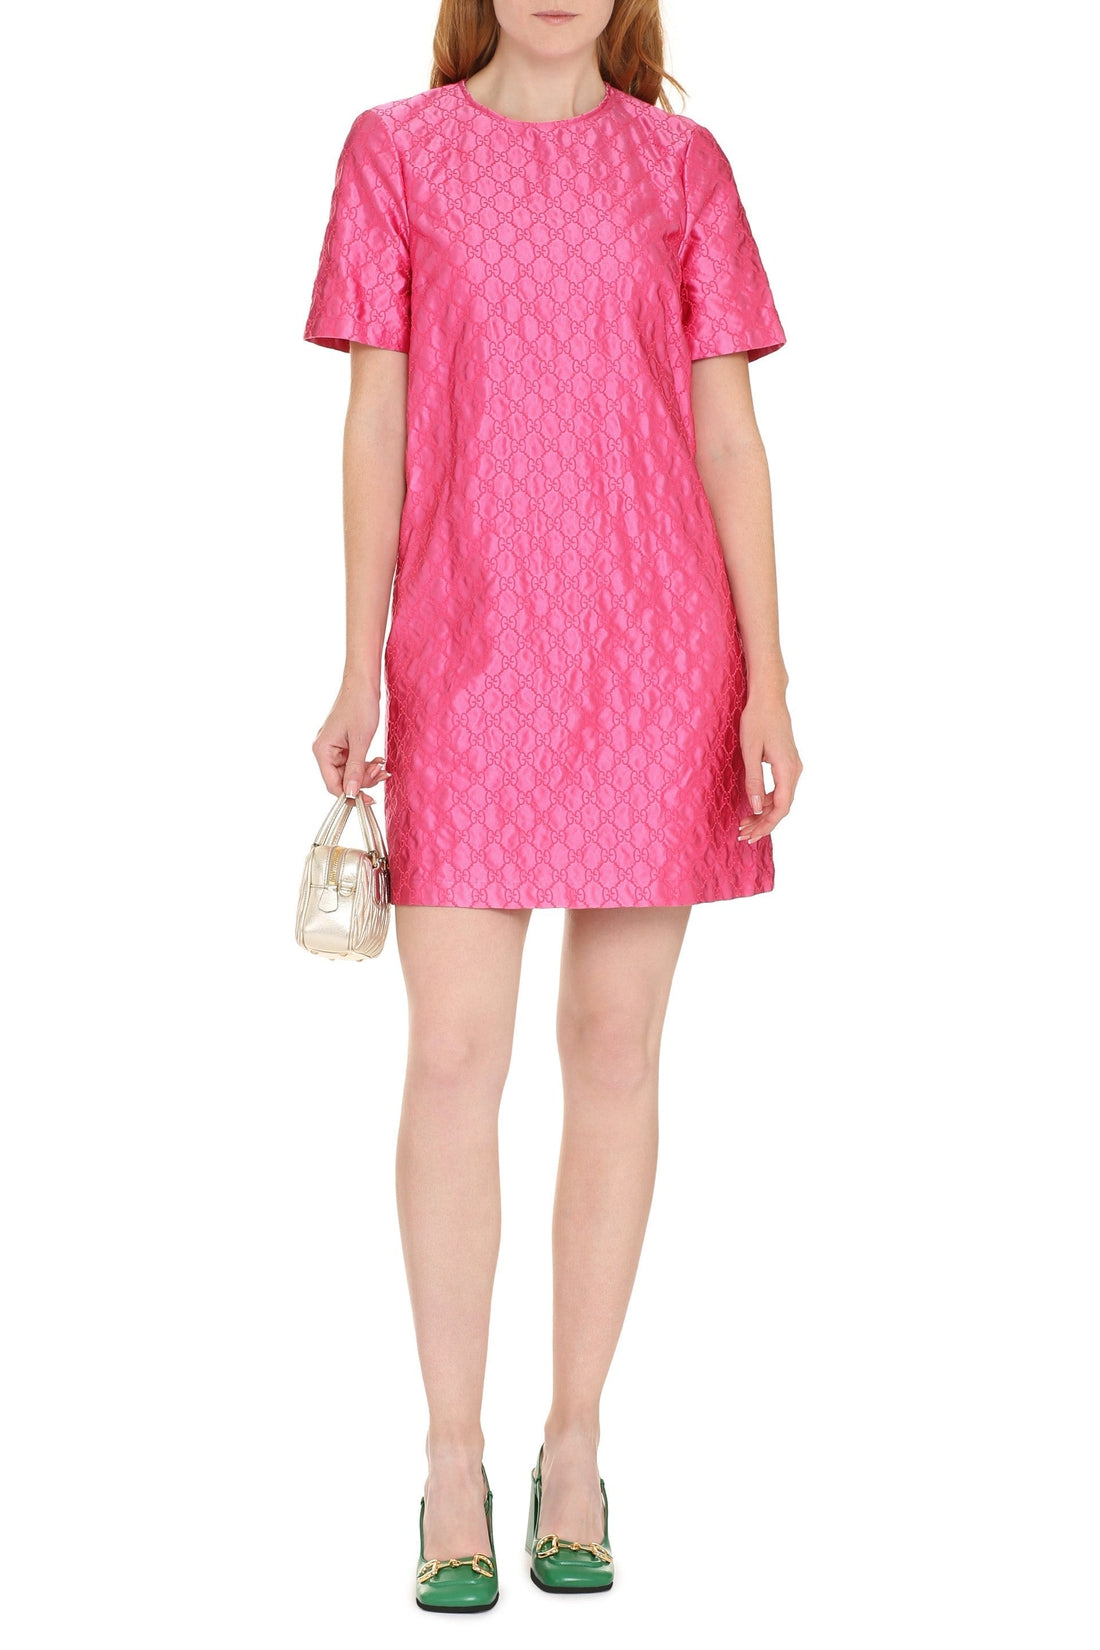 Gucci-OUTLET-SALE-Embroidered mini dress-ARCHIVIST